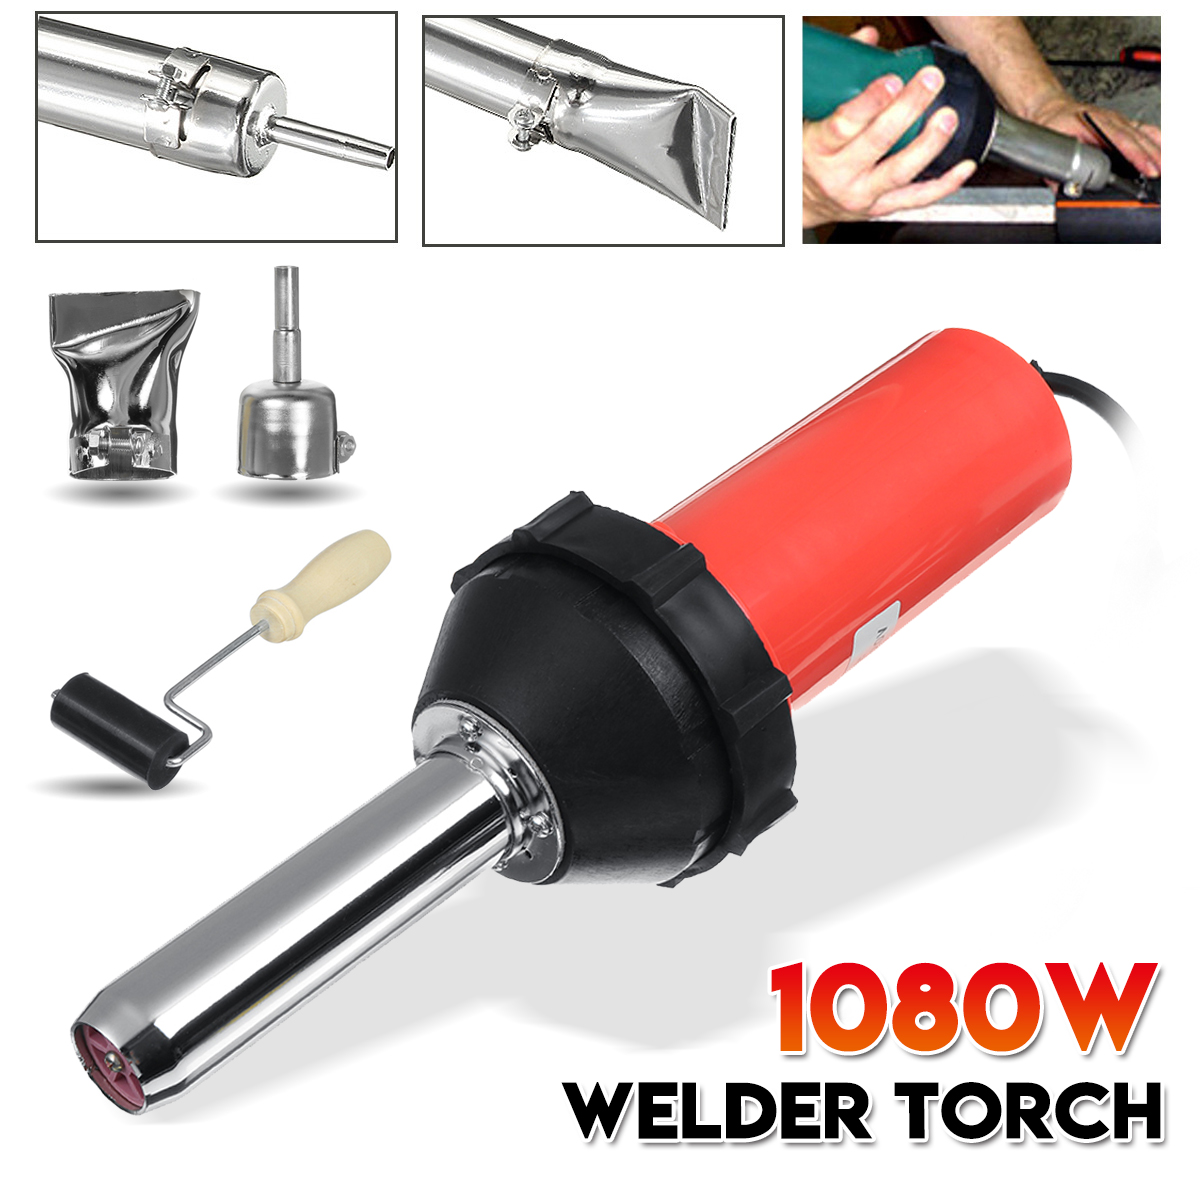 1080W-Plastic-Hot-Air-Welding-Tool-Welder-Torch-with-2Pcs-Nozzles--Roller--Adapter-1558534-2